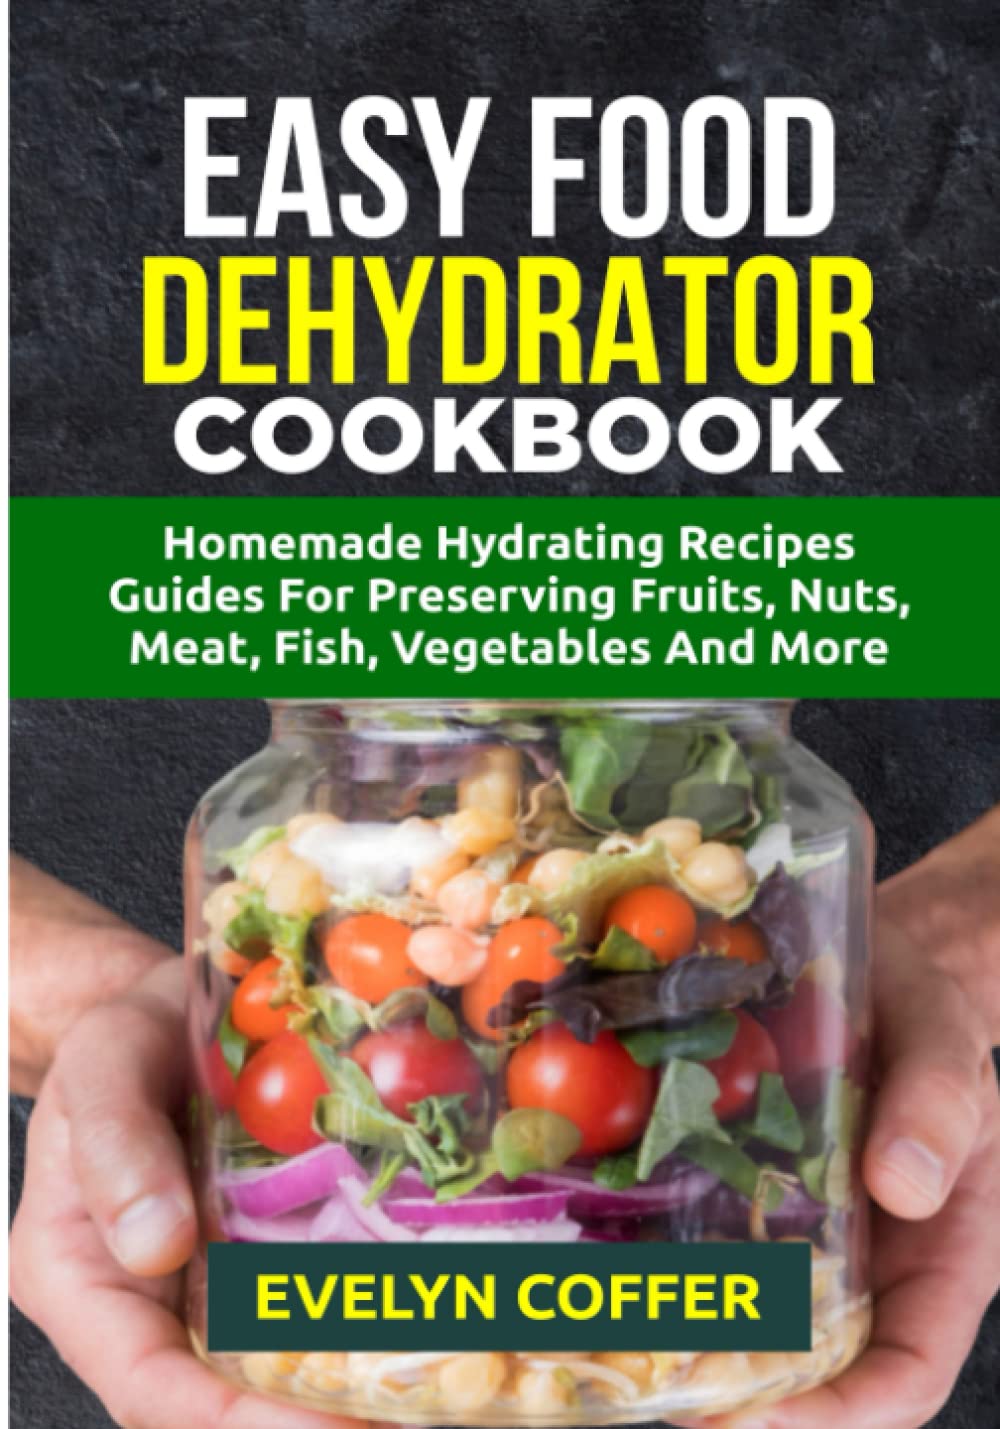 Easy Food Dehydrator Cookbook: Homemade Hydrating Recipes Guides For Preserving Fruits, Nuts, Meat, Fish, Vegetables And More